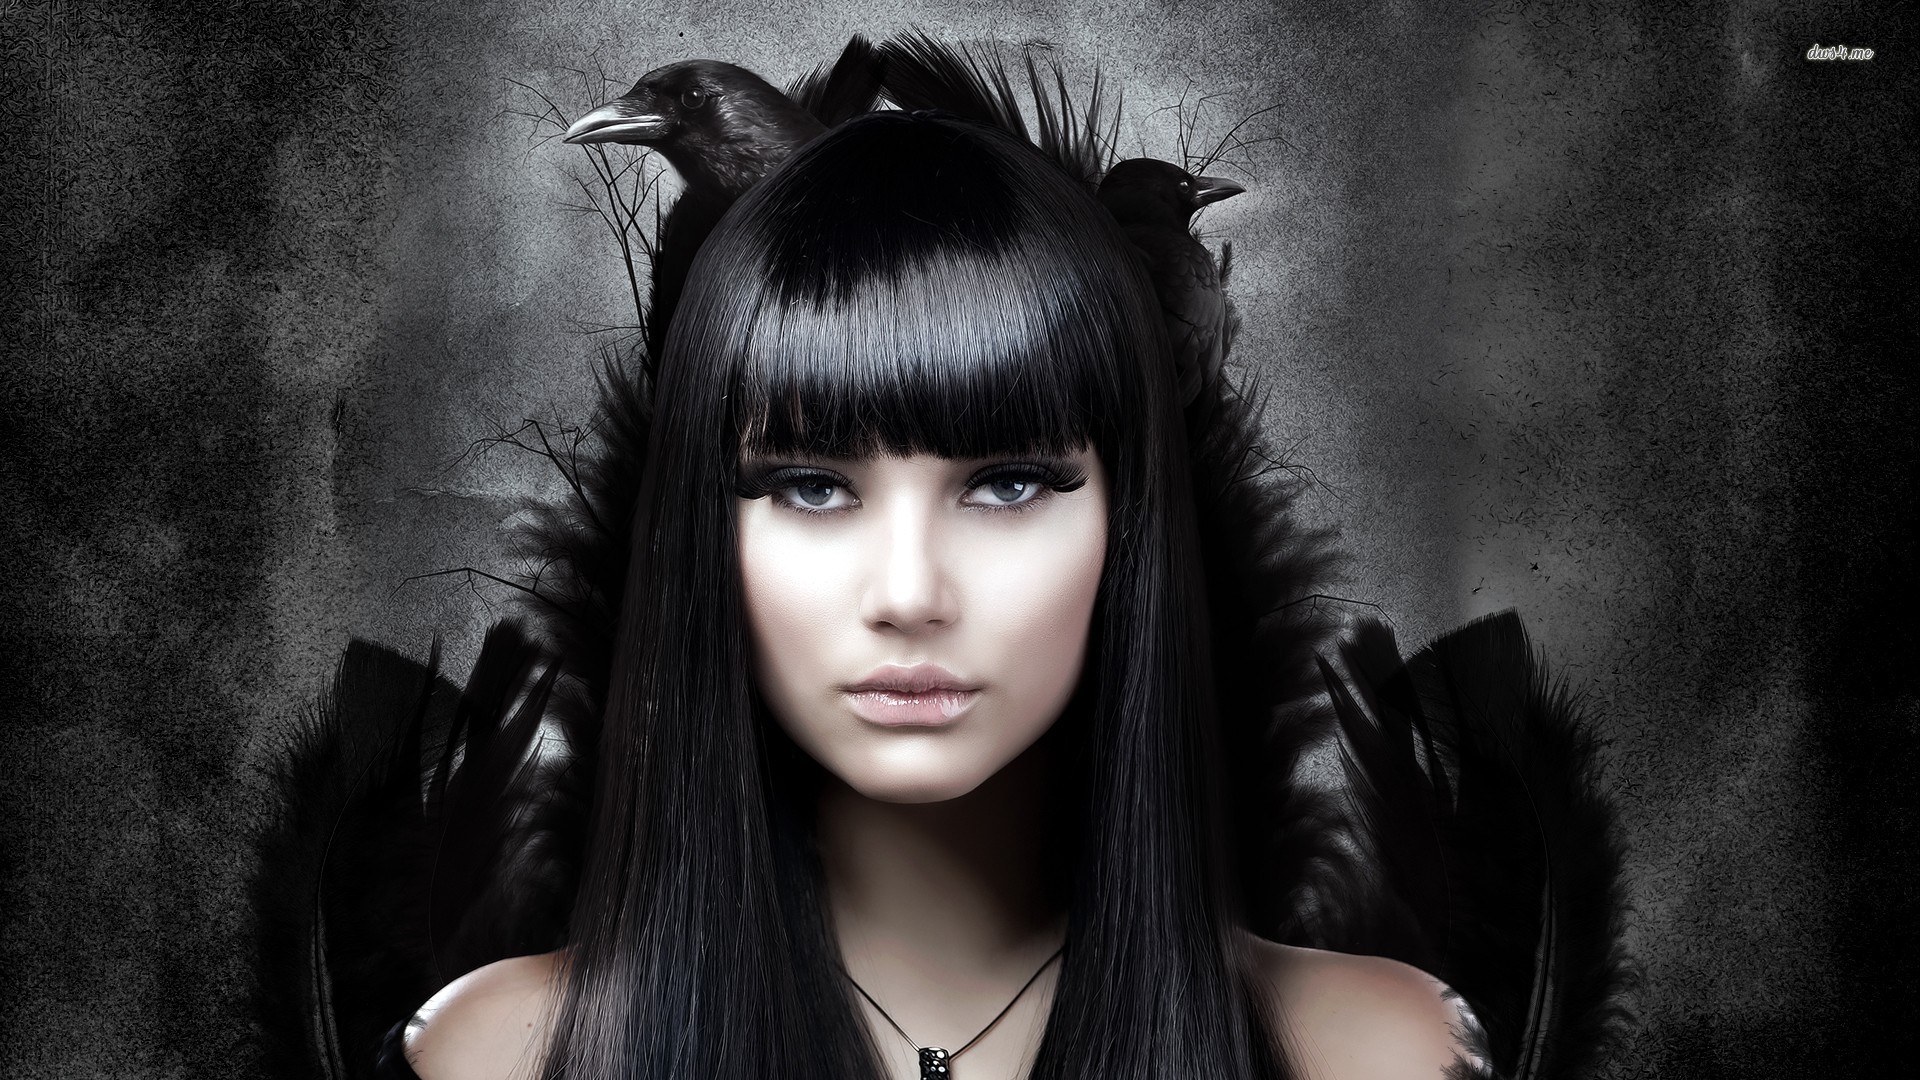 1920x1080 ... Goth girl with her raven wallpaper  ...